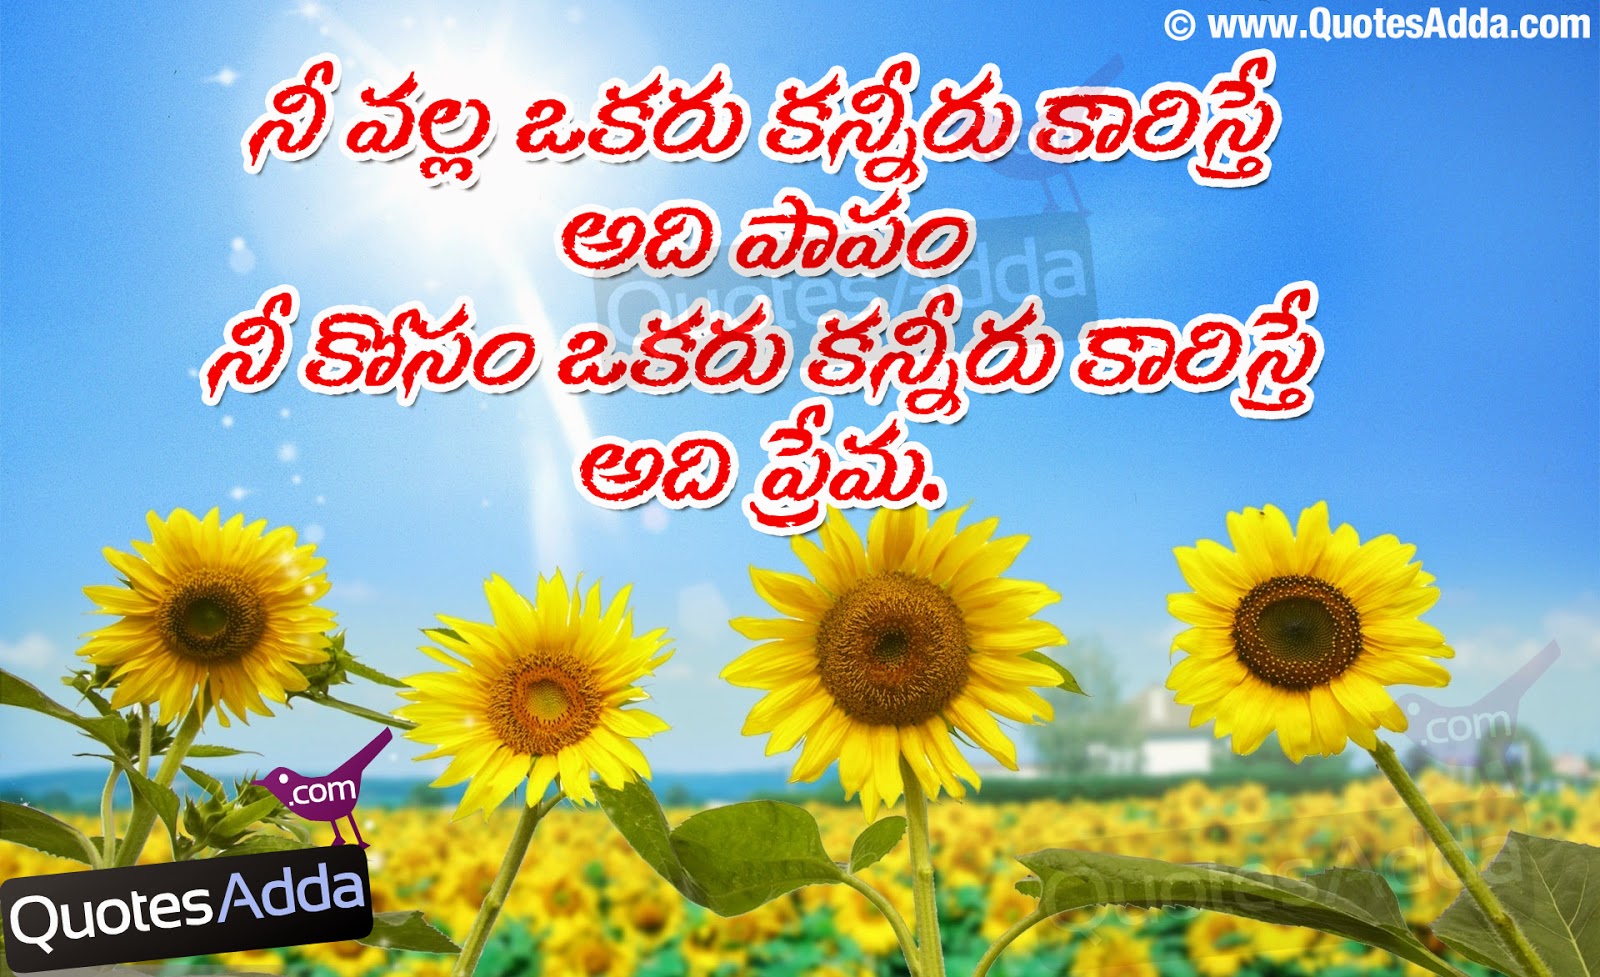 Sad Spanish Quotes With Meaning Telugu nice love value quotations images quotesadda